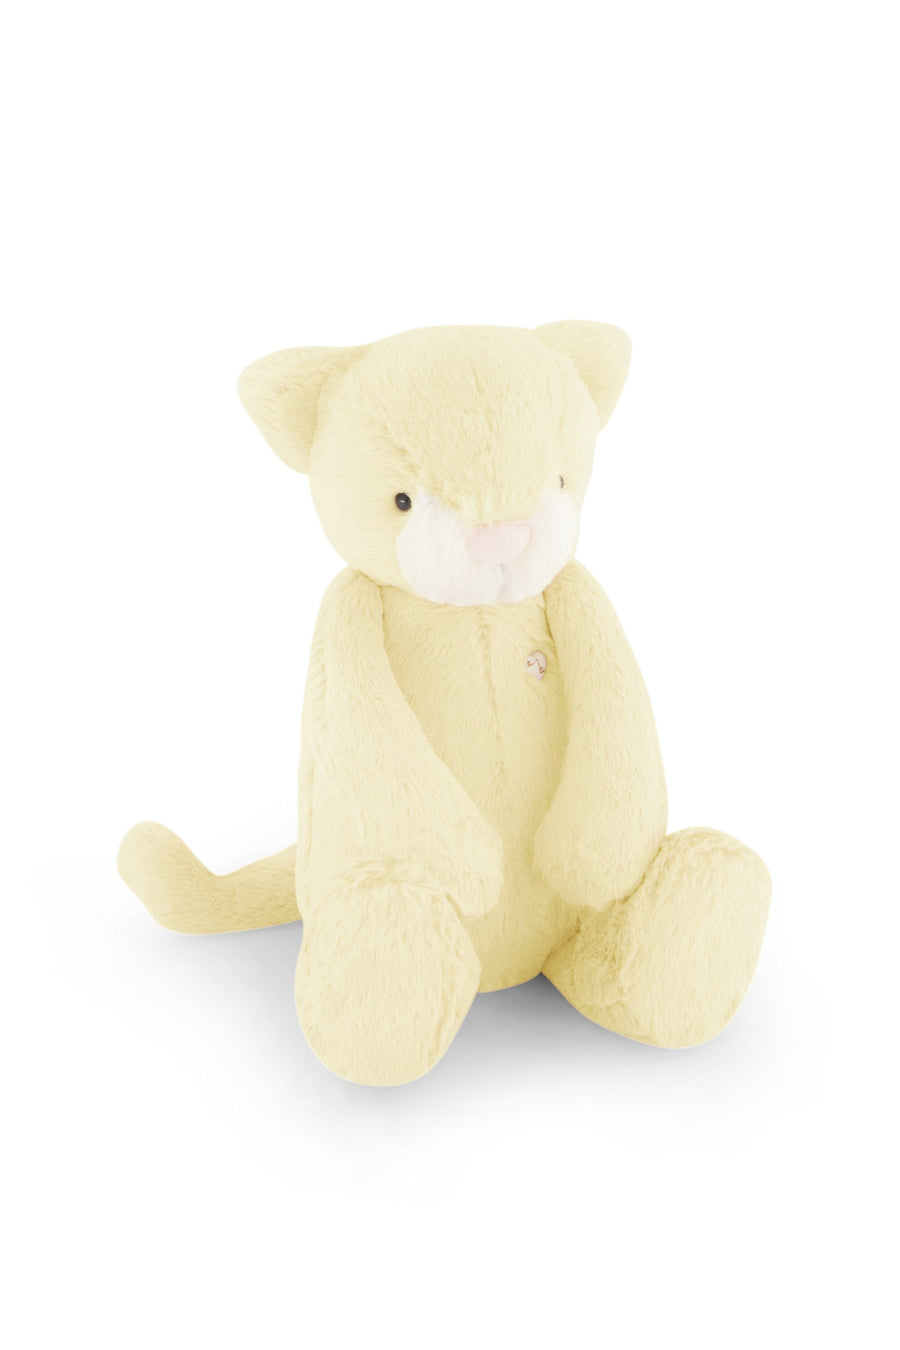 Snuggle Bunnies - Elsie the Kitty - Anise Childrens Toy from Jamie Kay USA